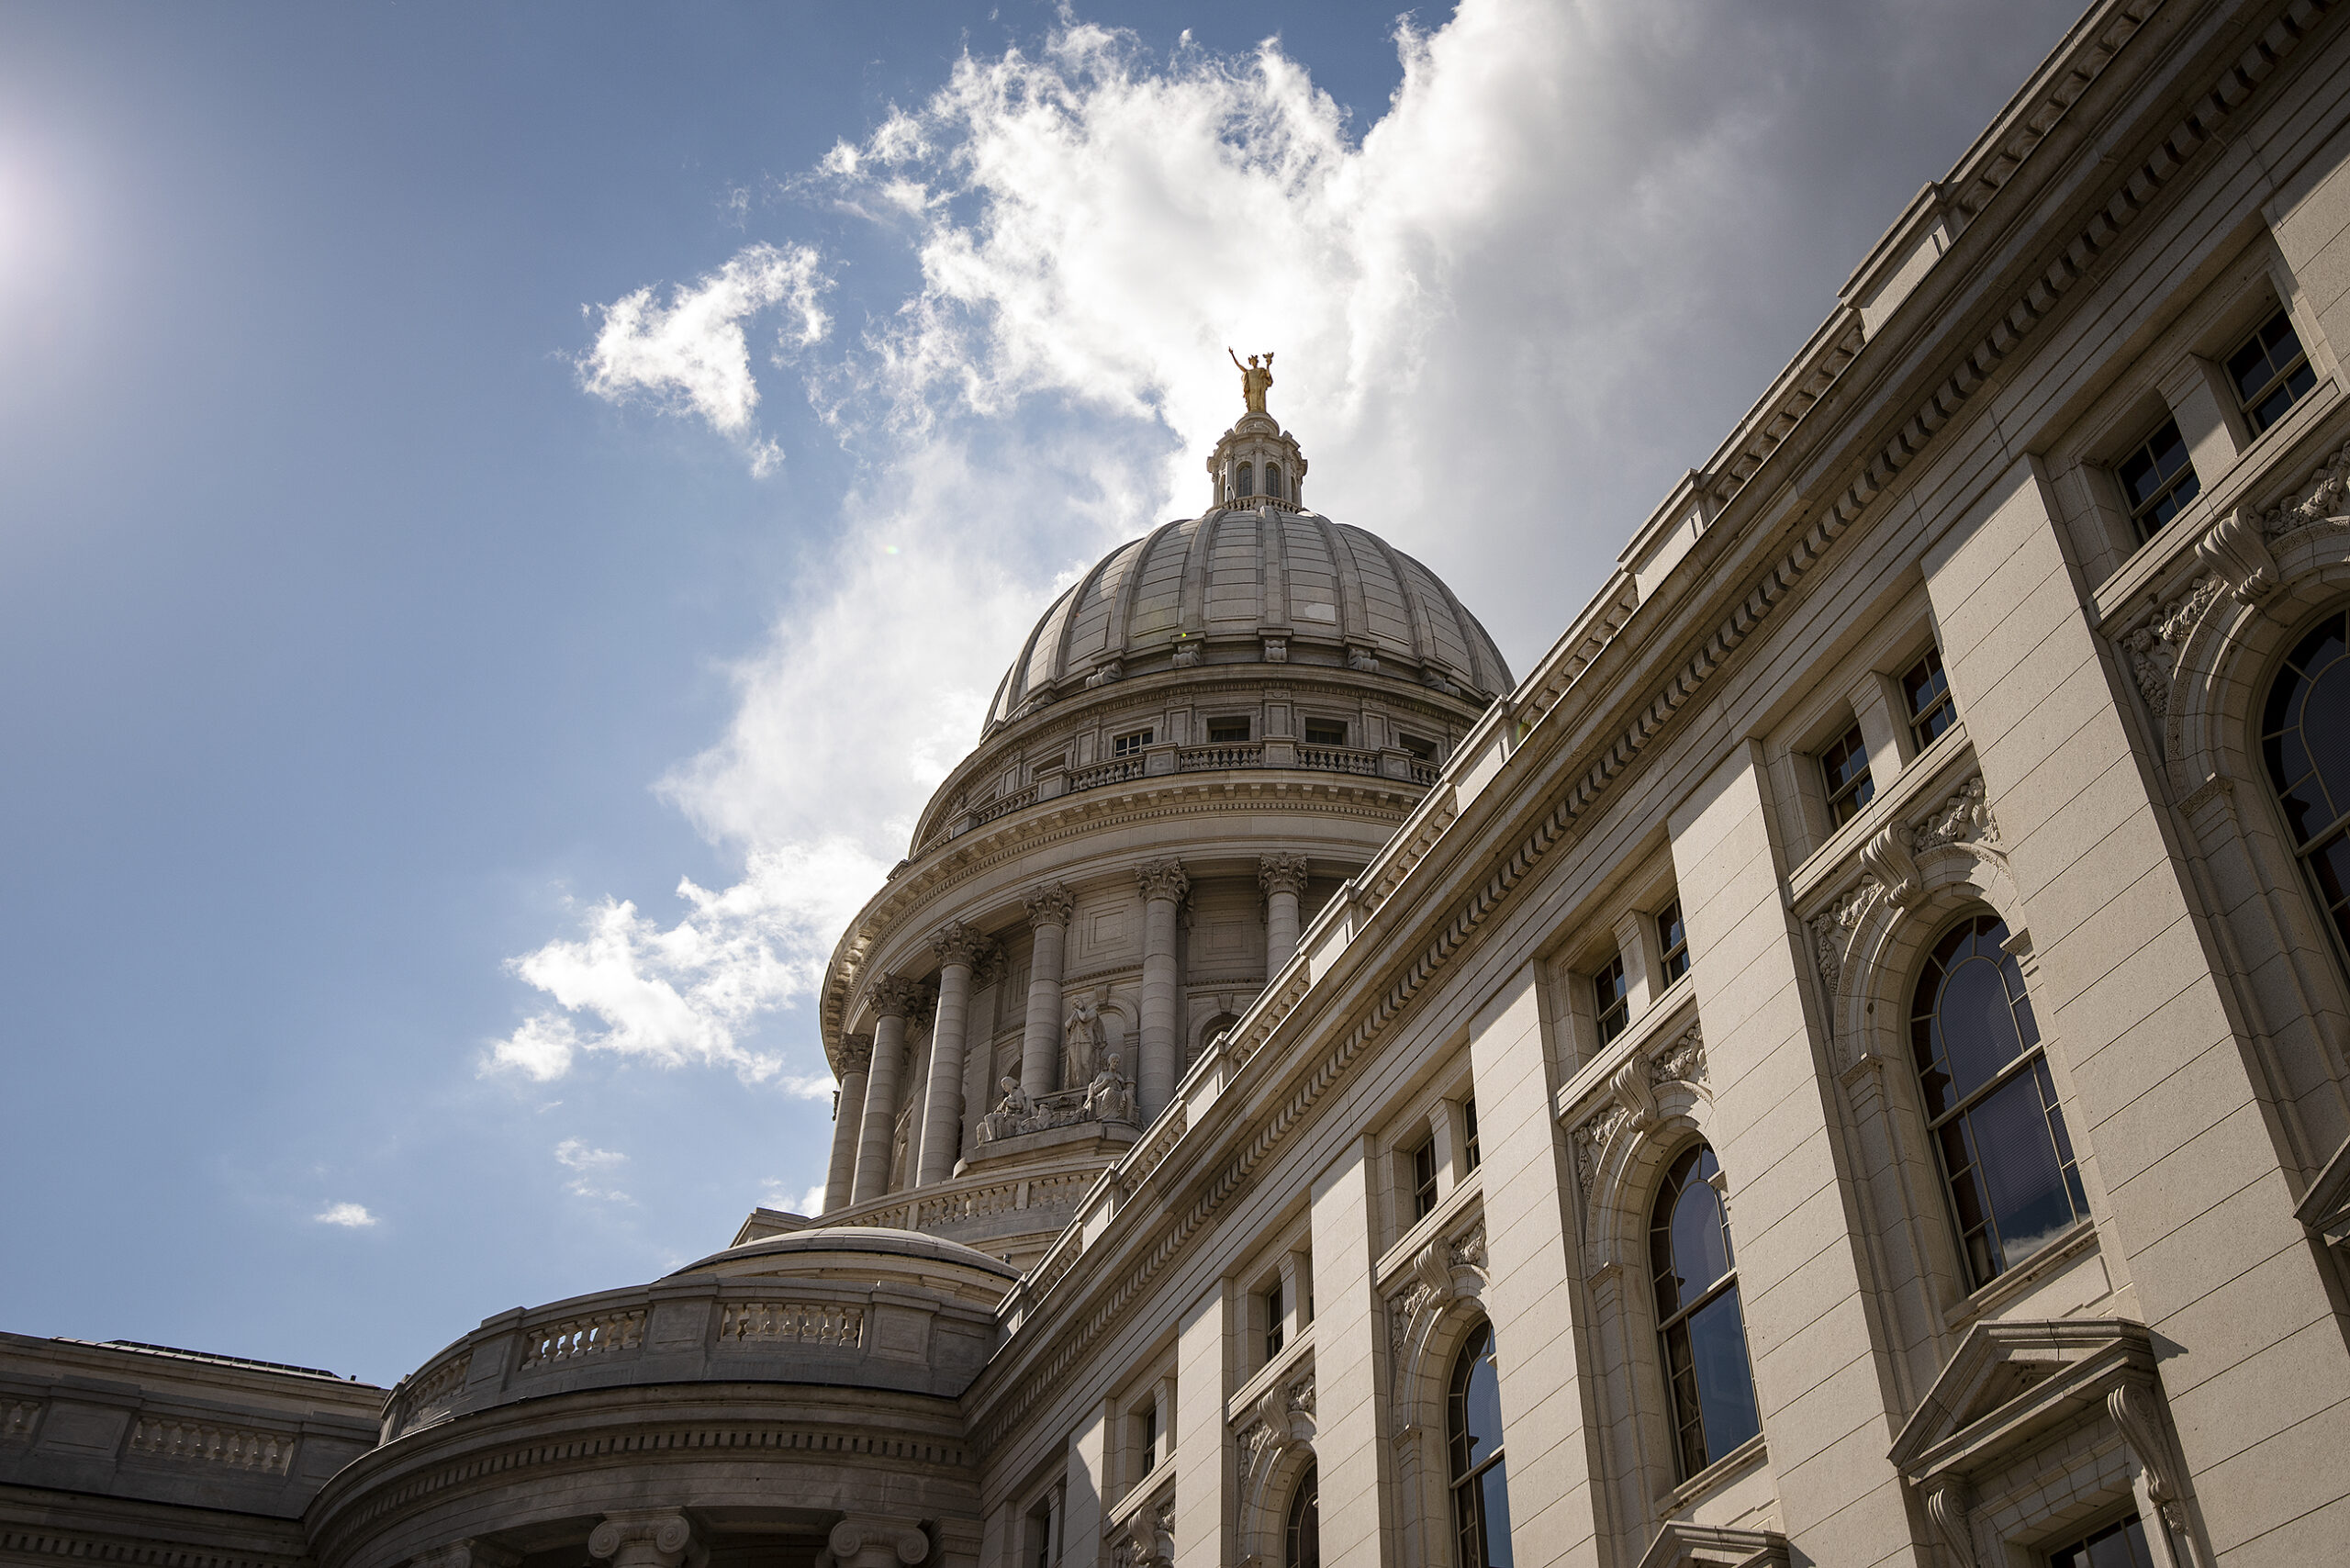 Clouds and a blue sky are the backdrop for the Wisconsin State Capitol